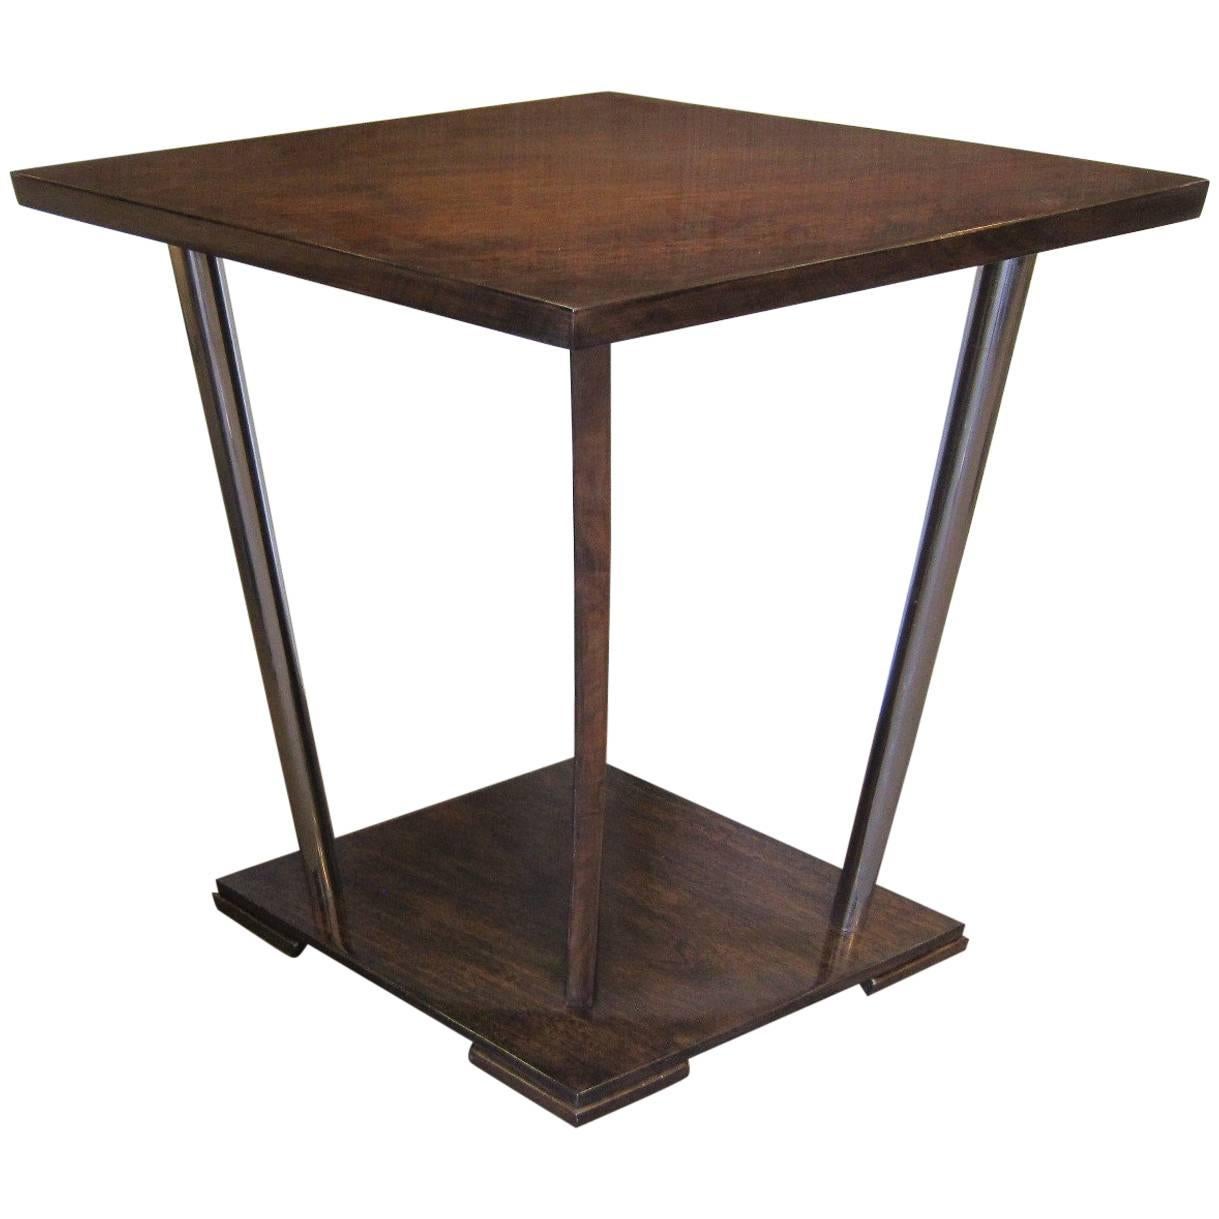 French Art Deco Unusual Diamond Shaped Walnut Side Table with Nickel Supports For Sale